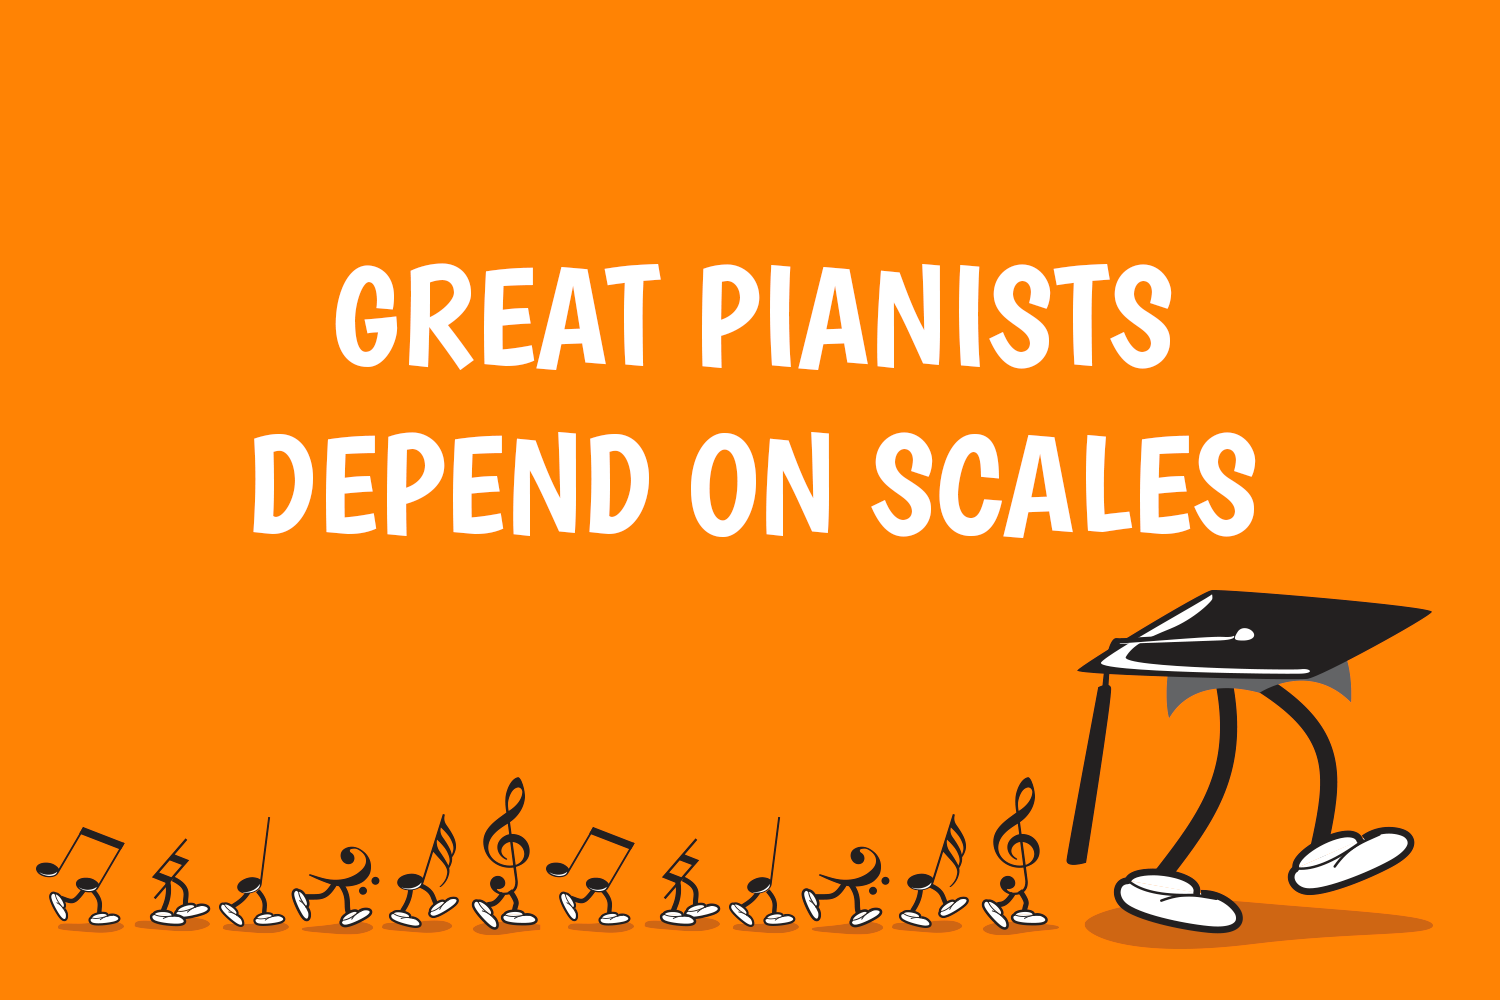 Great Pianists Depend on Scales